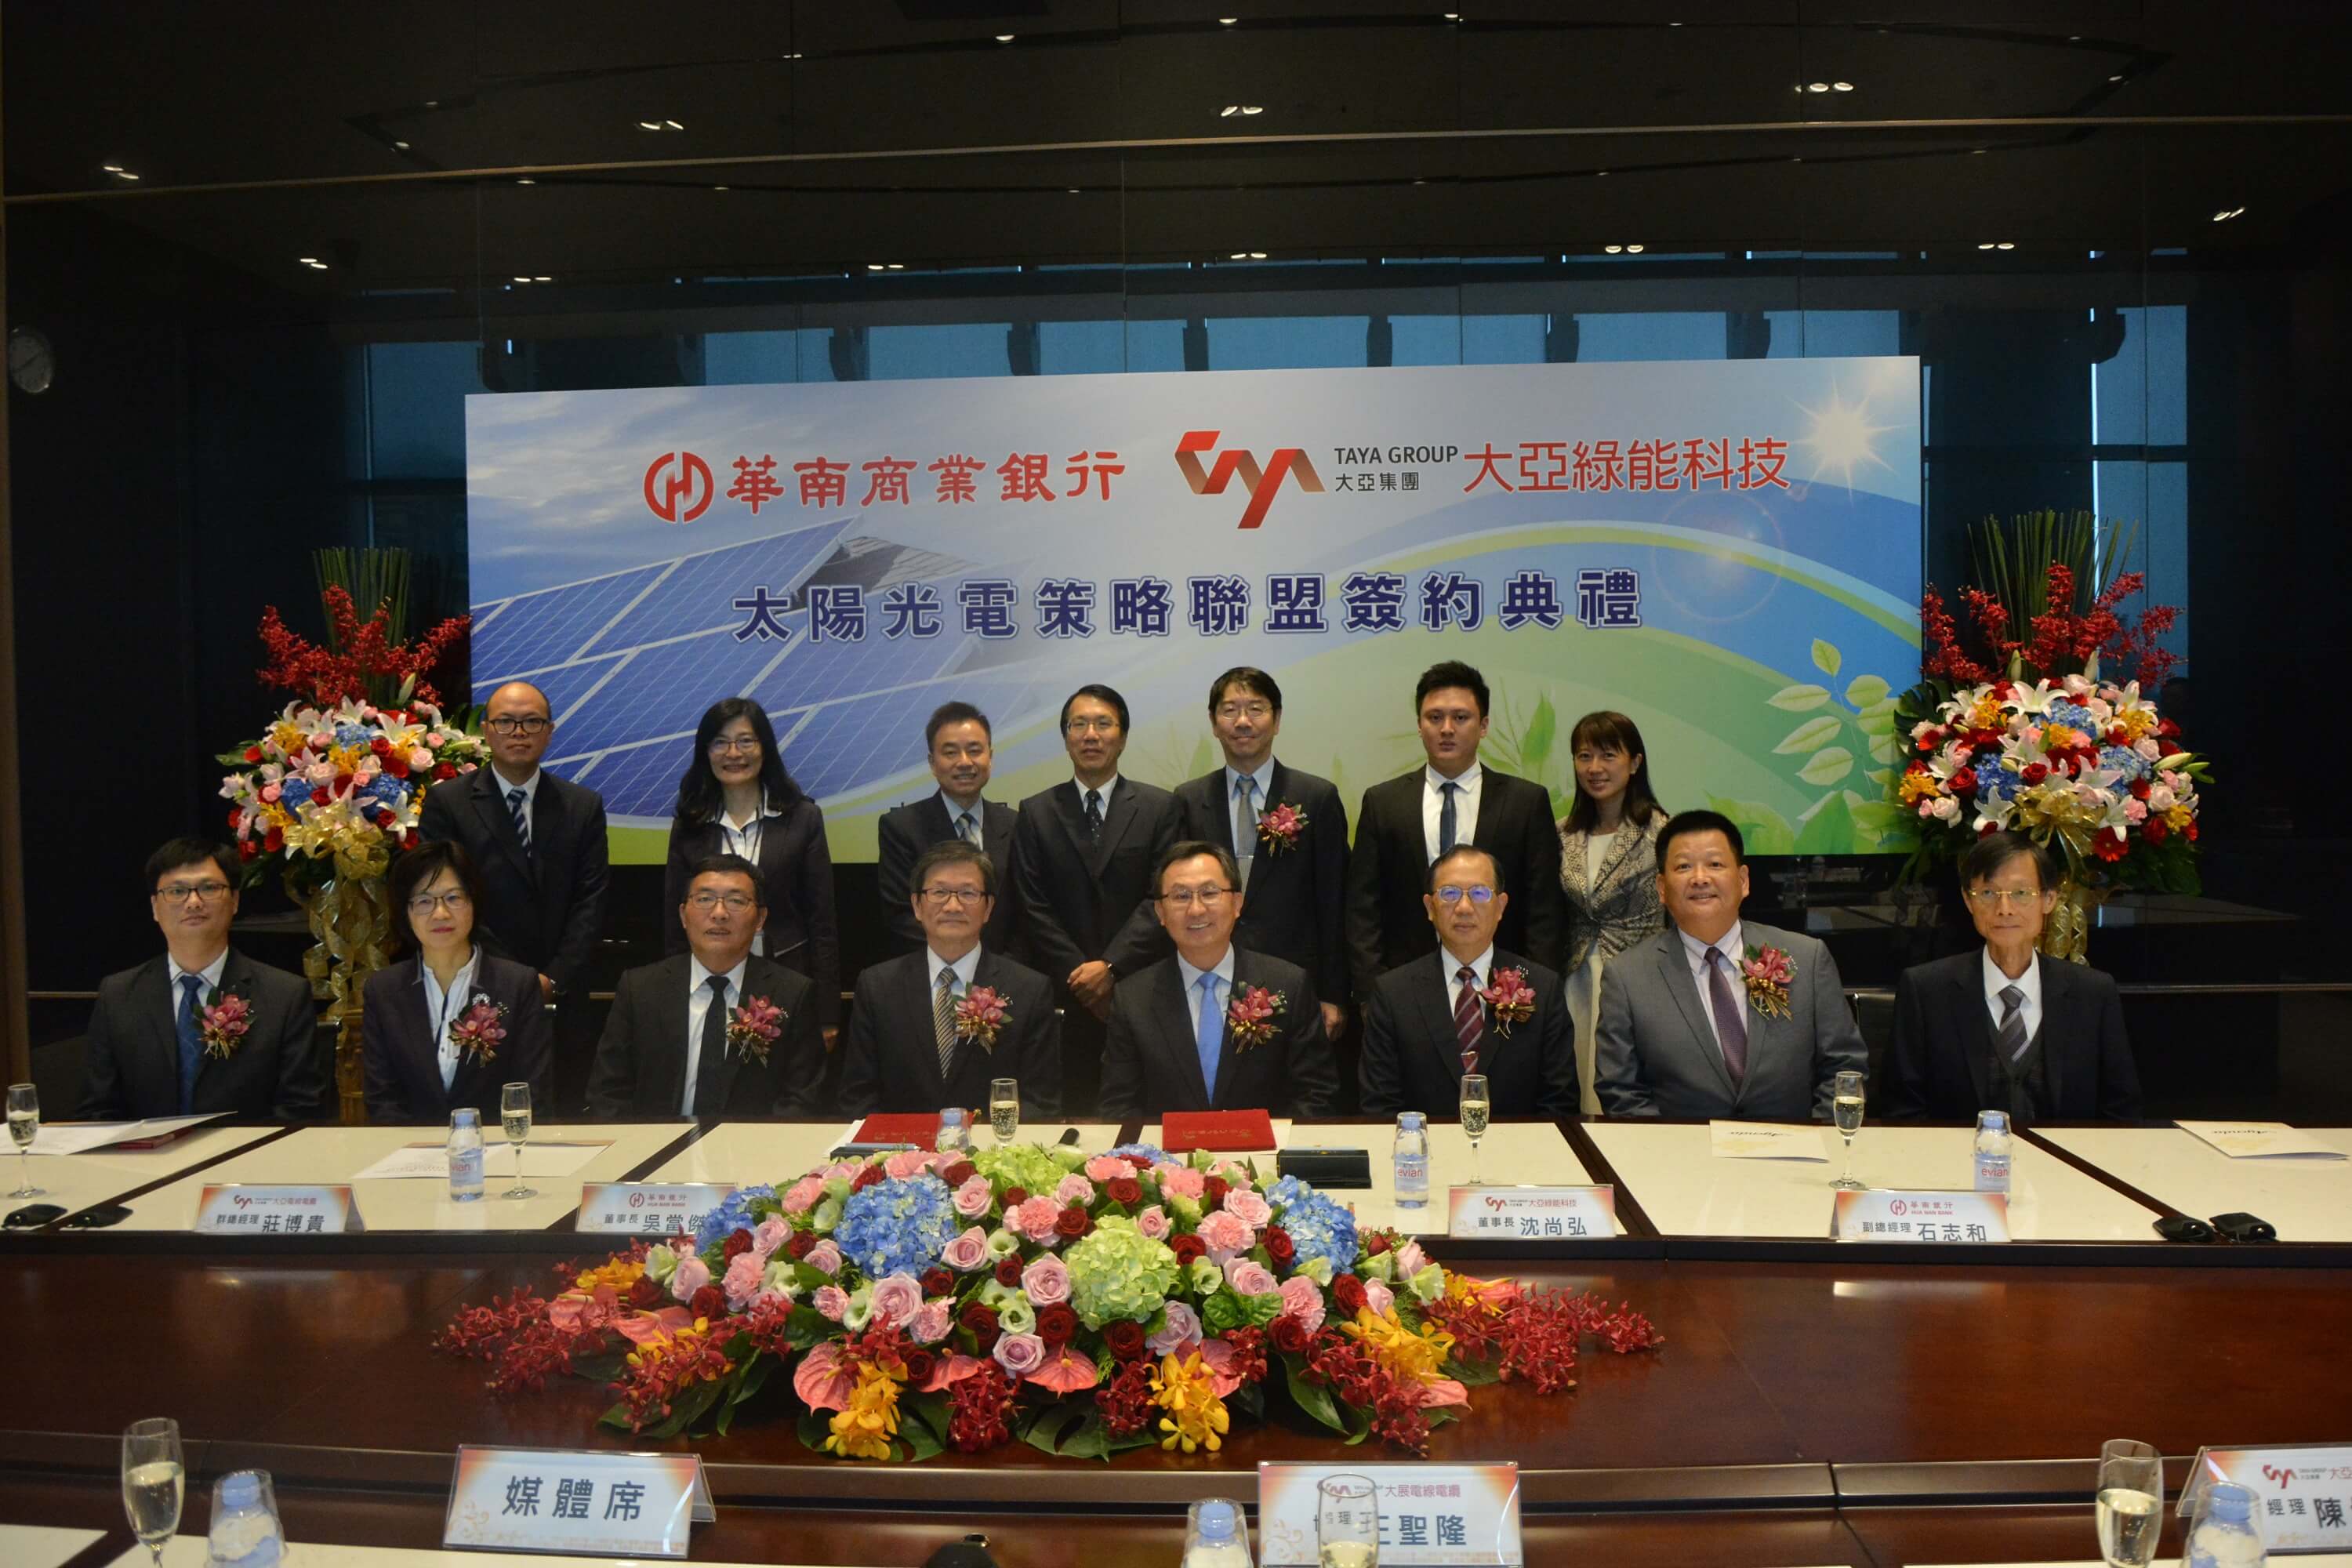 Taya Green Energy Signed a Memorandum of Understanding for Cooperation with Hua Nan Bank in the Field of Photovoltaics to Promote Sustainable Development